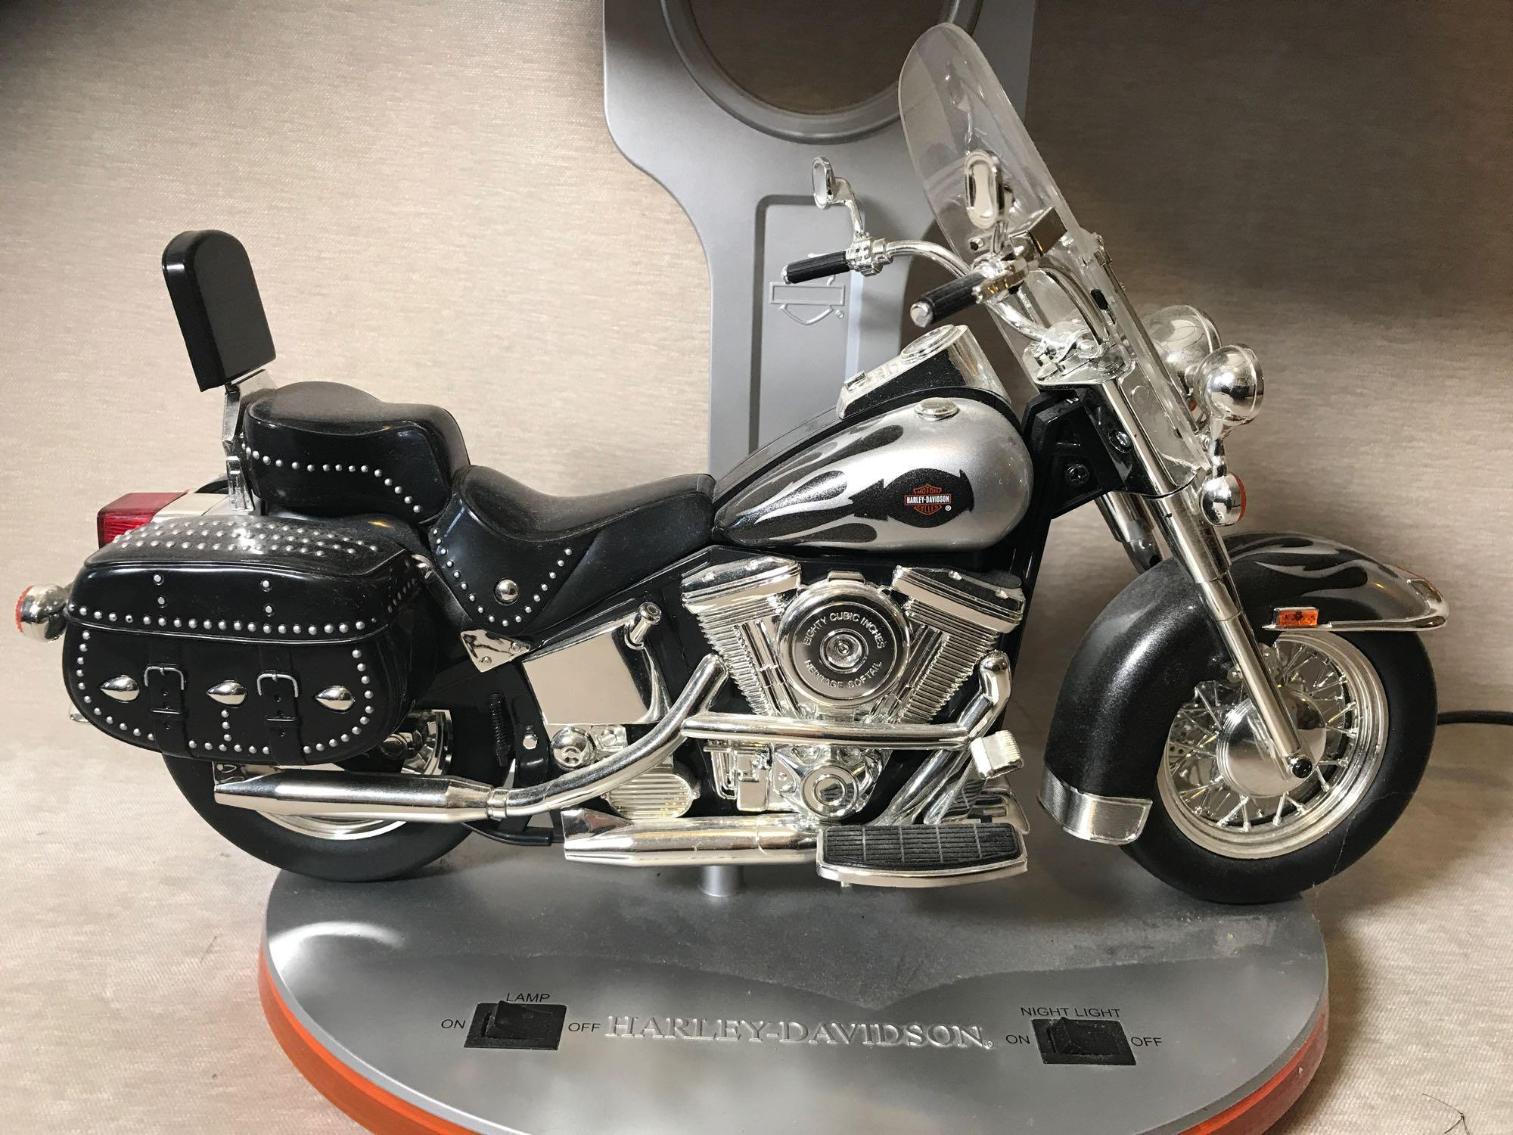 Image for Harley Davidson Lamp and More 